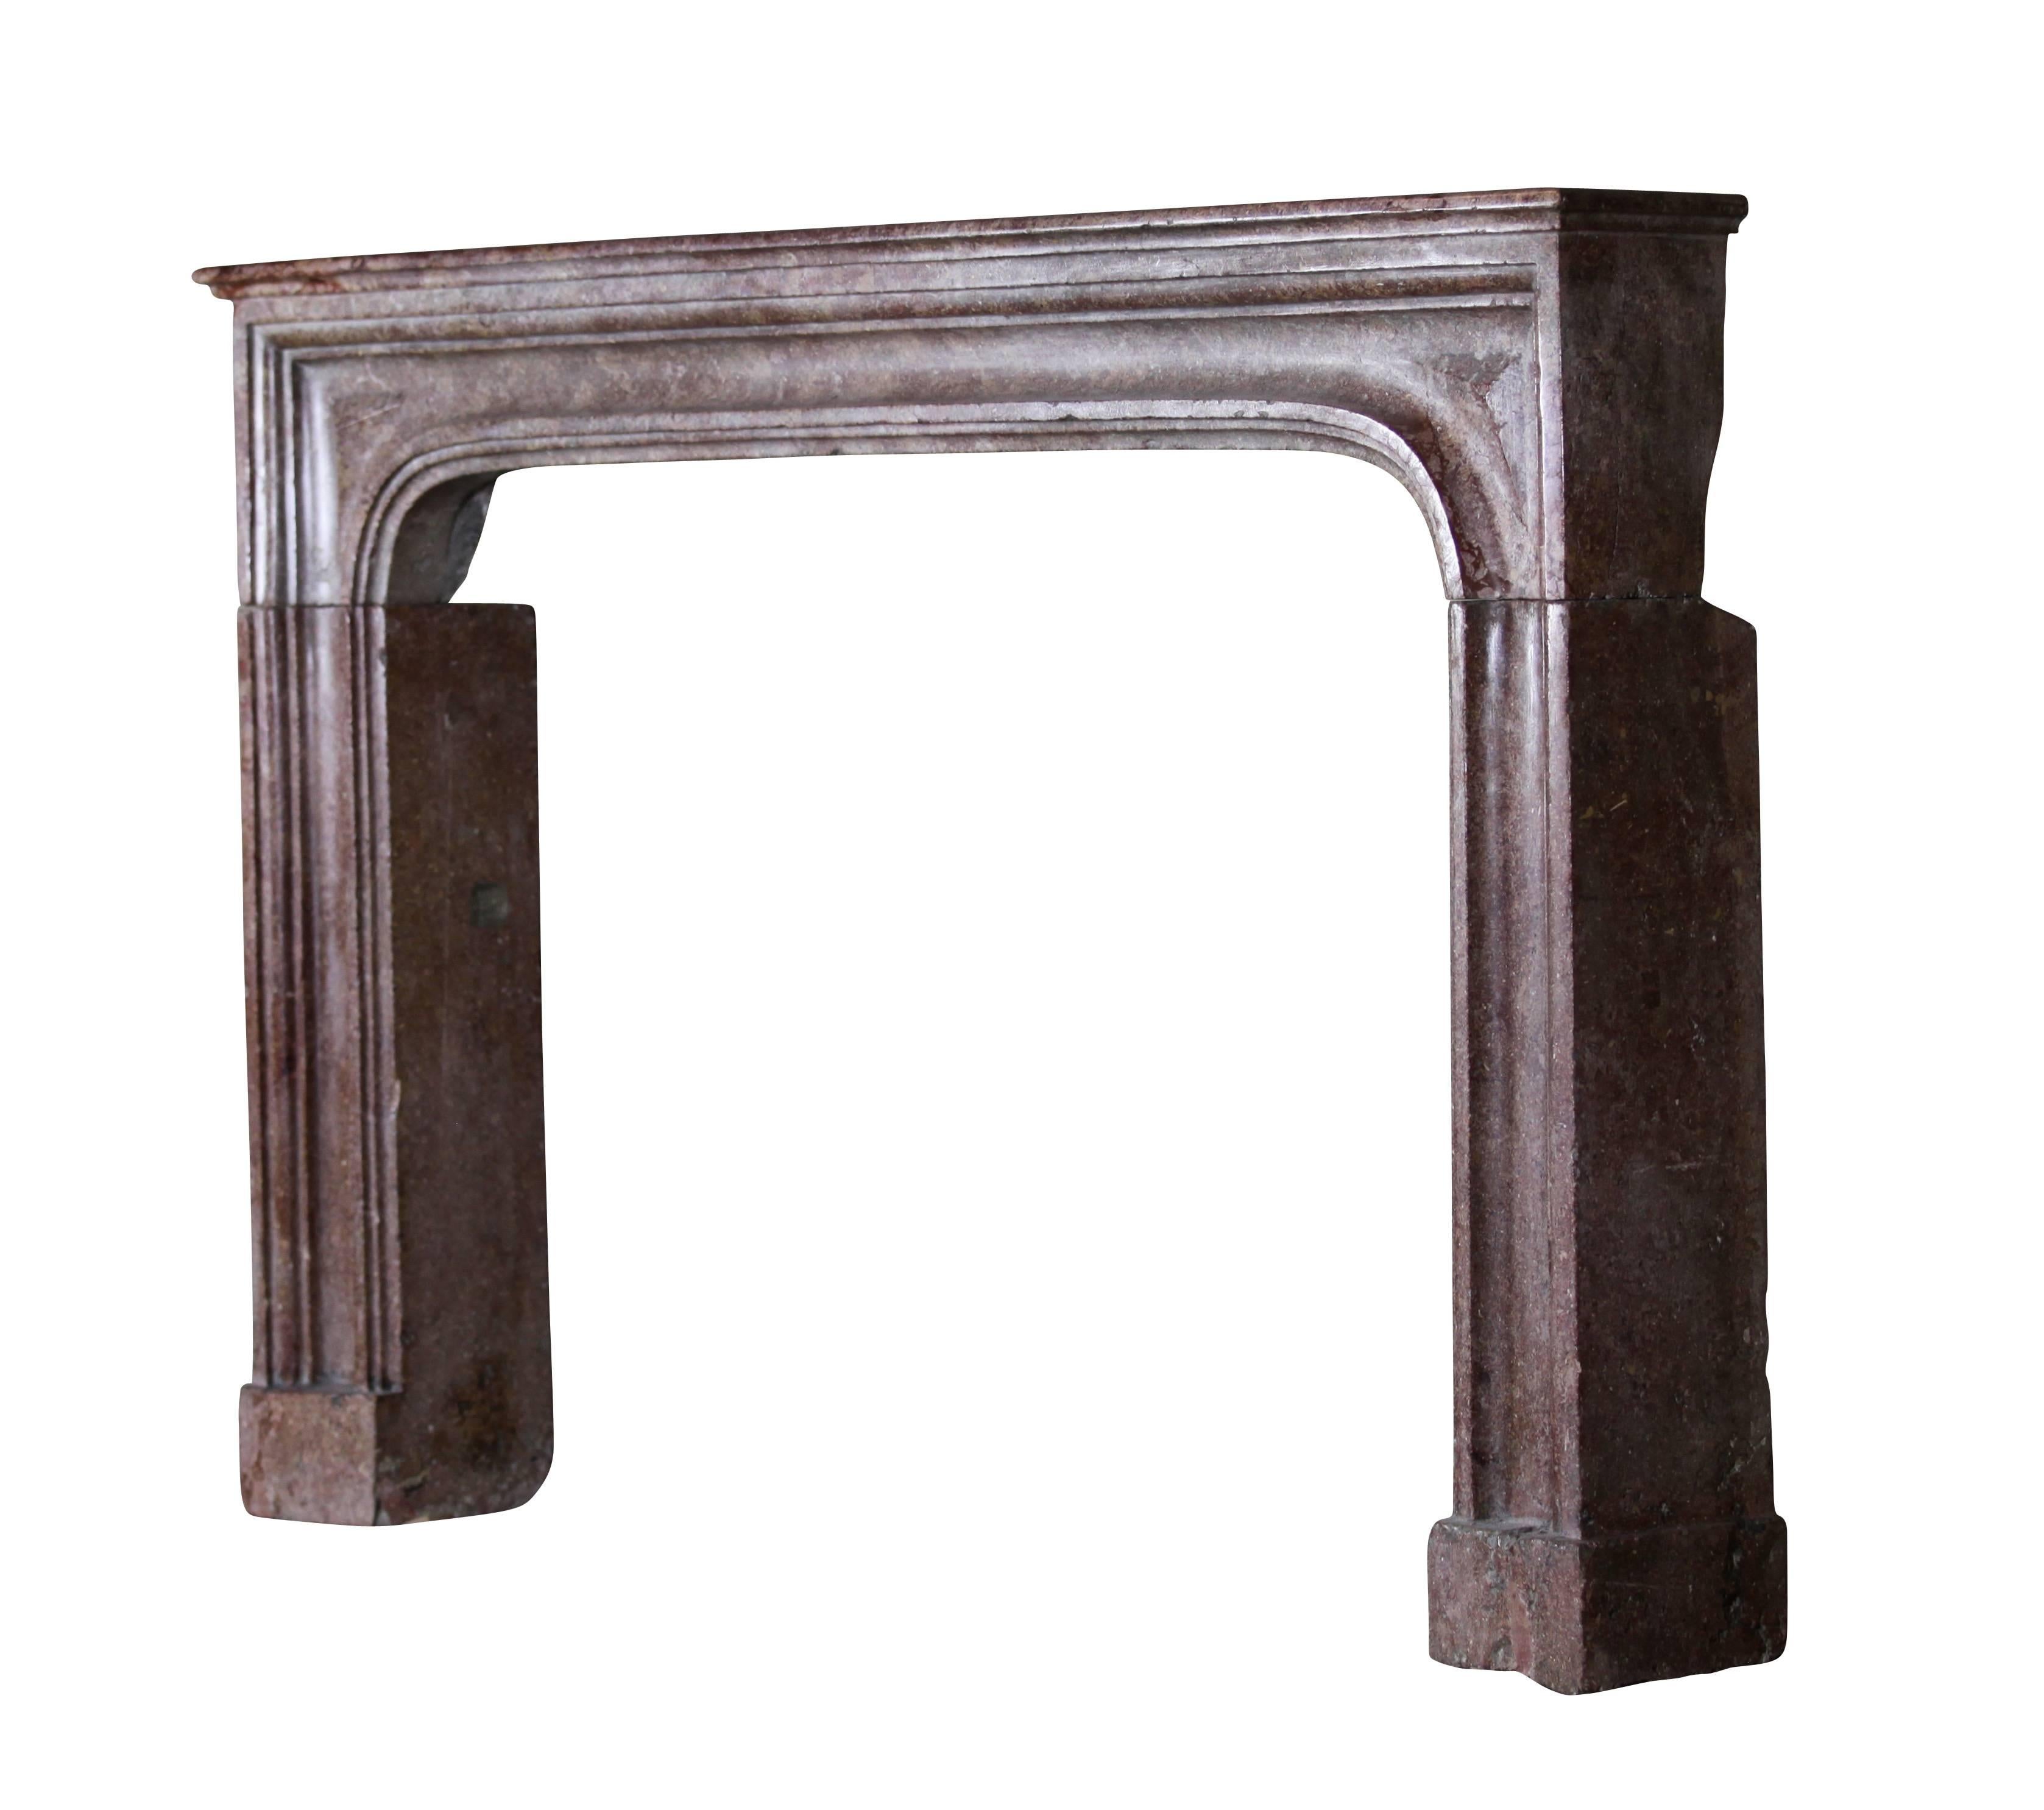 Carved 17th Century Timely Antique Fireplace Surround For Sale